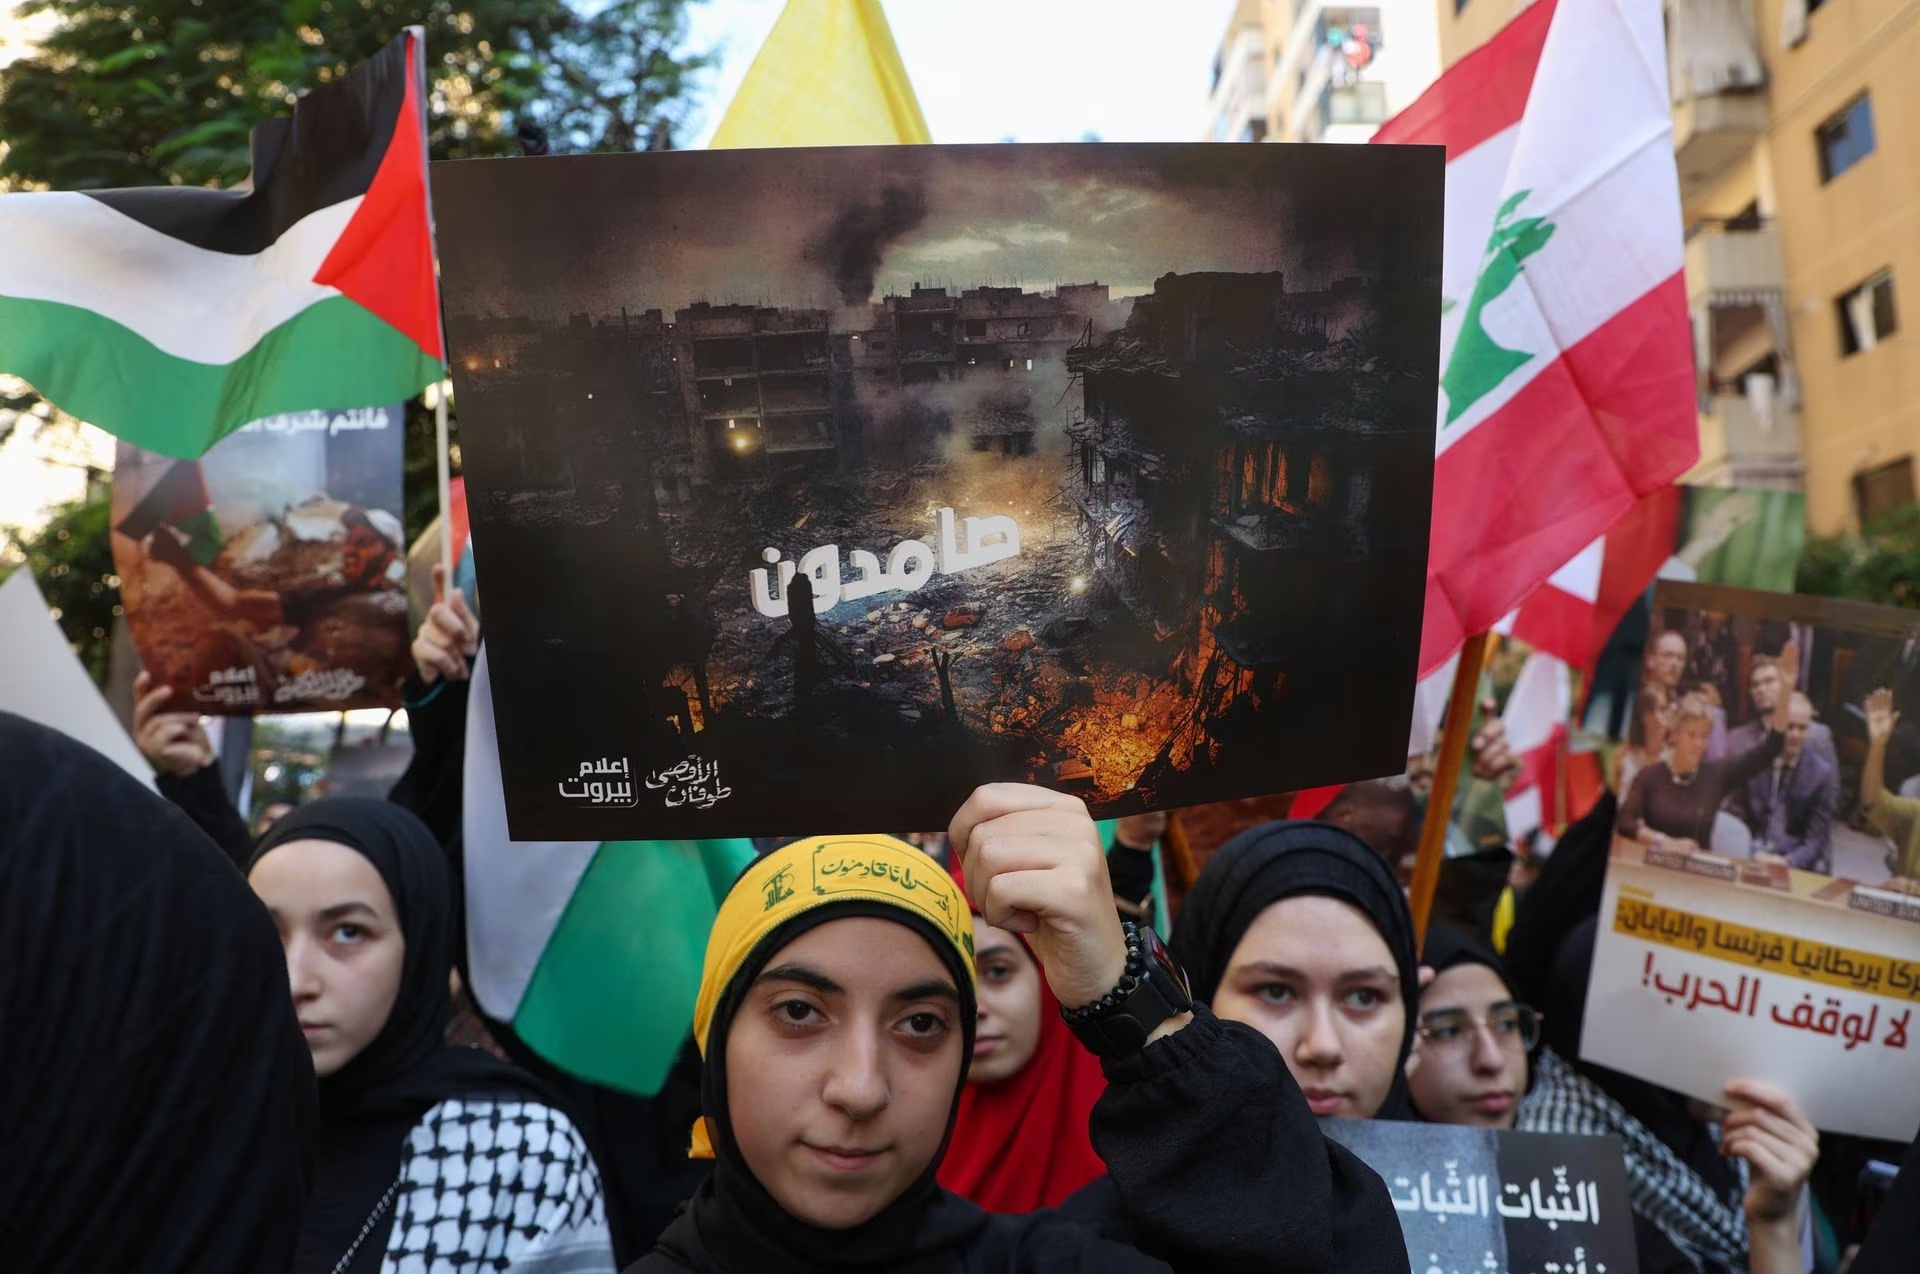 Hezbollah supporters in Beirut's southern suburbs, take part in a protest, after hundreds of Palestinians were killed in an Israeli blast at Al-Ahli hospital in Gaza.